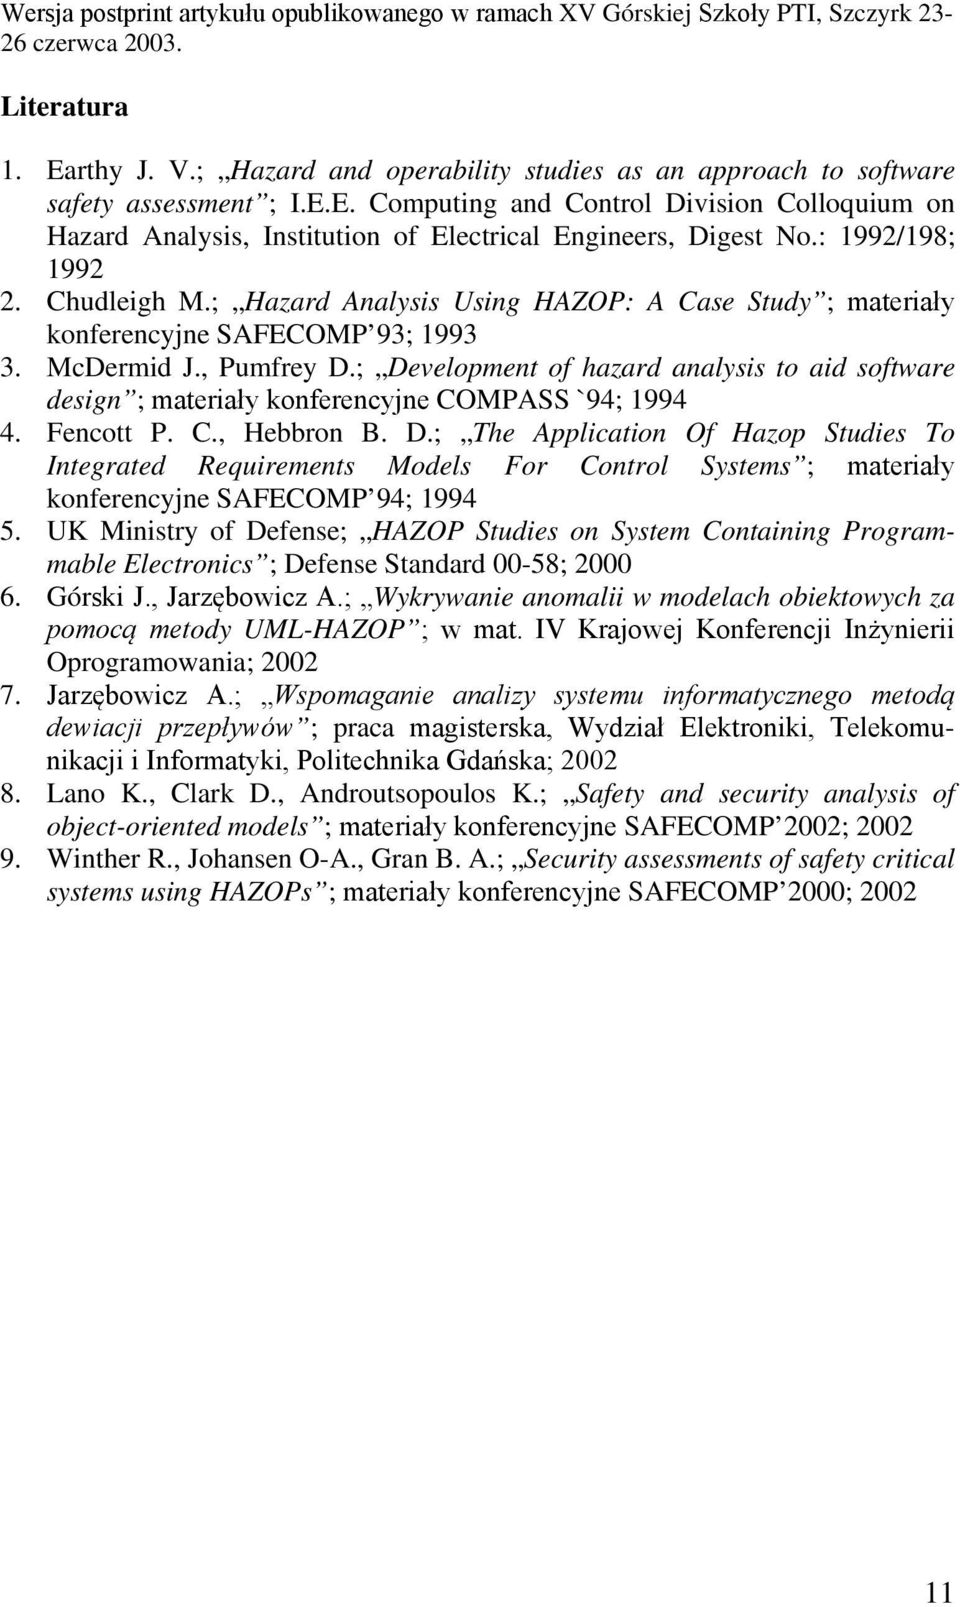 ; Development of hazard analysis to aid software design ; materiały konferencyjne COMPASS `94; 1994 4. Fencott P. C., Hebbron B. D.; The Application Of Hazop Studies To Integrated Requirements Models For Control Systems ; materiały konferencyjne SAFECOMP 94; 1994 5.